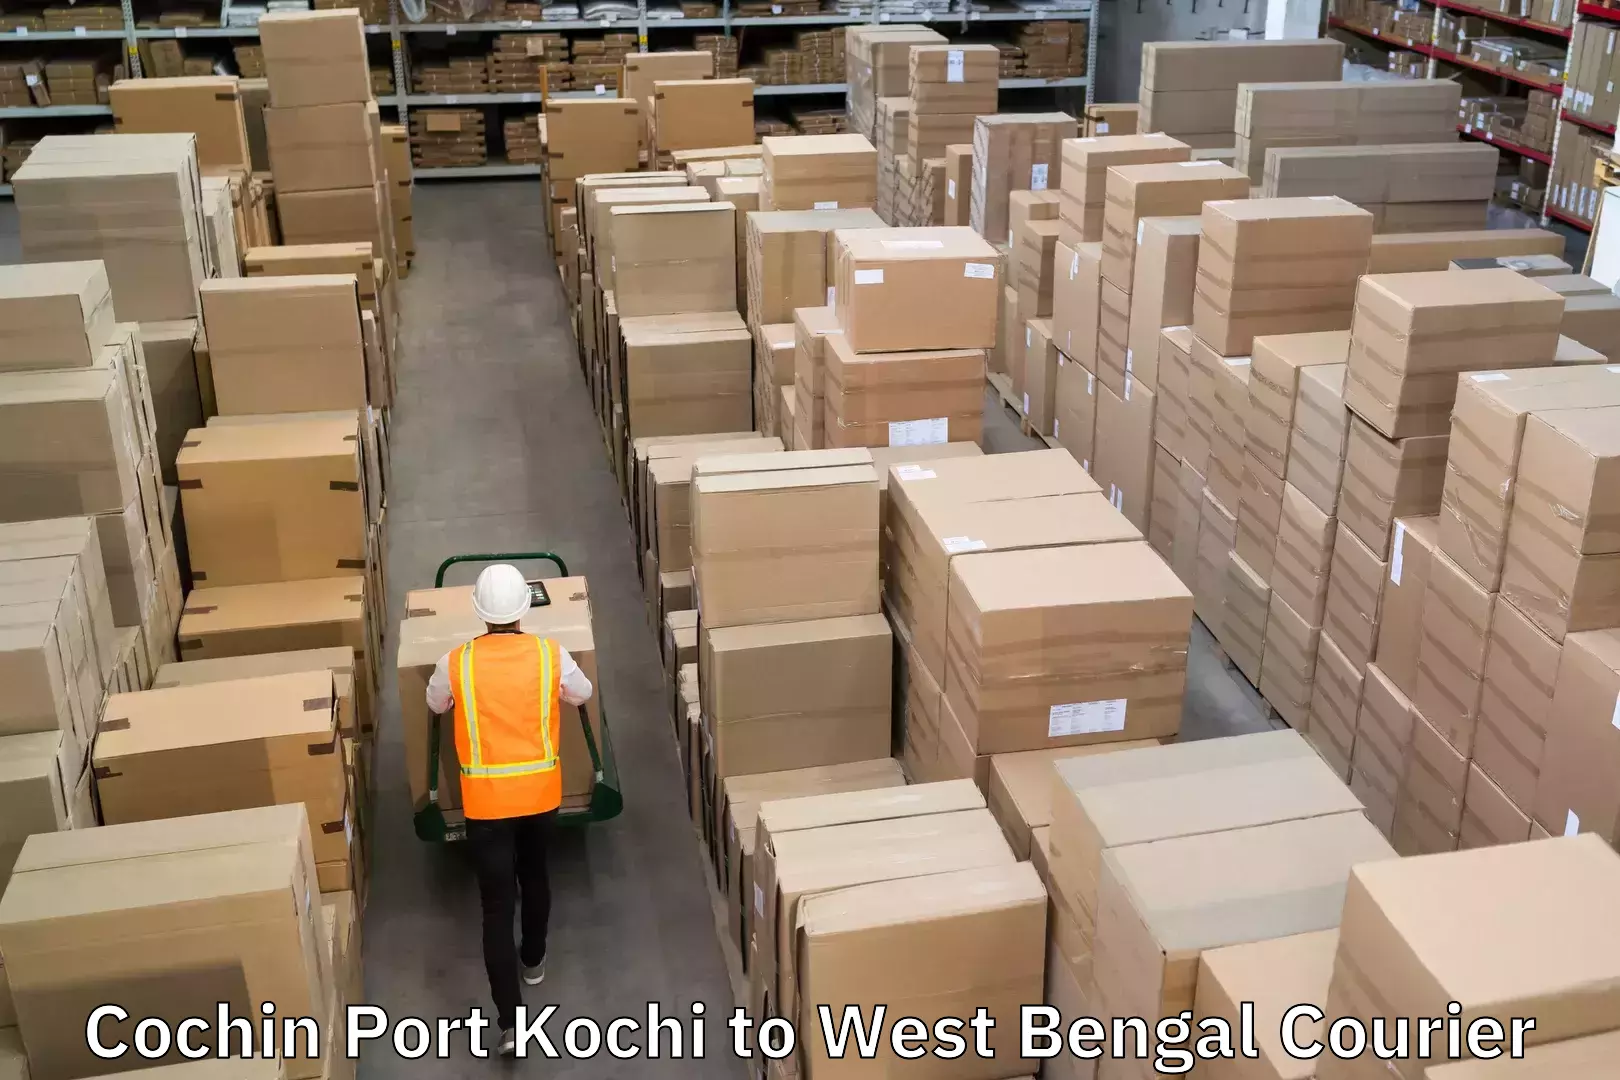 Nationwide parcel services Cochin Port Kochi to West Bengal